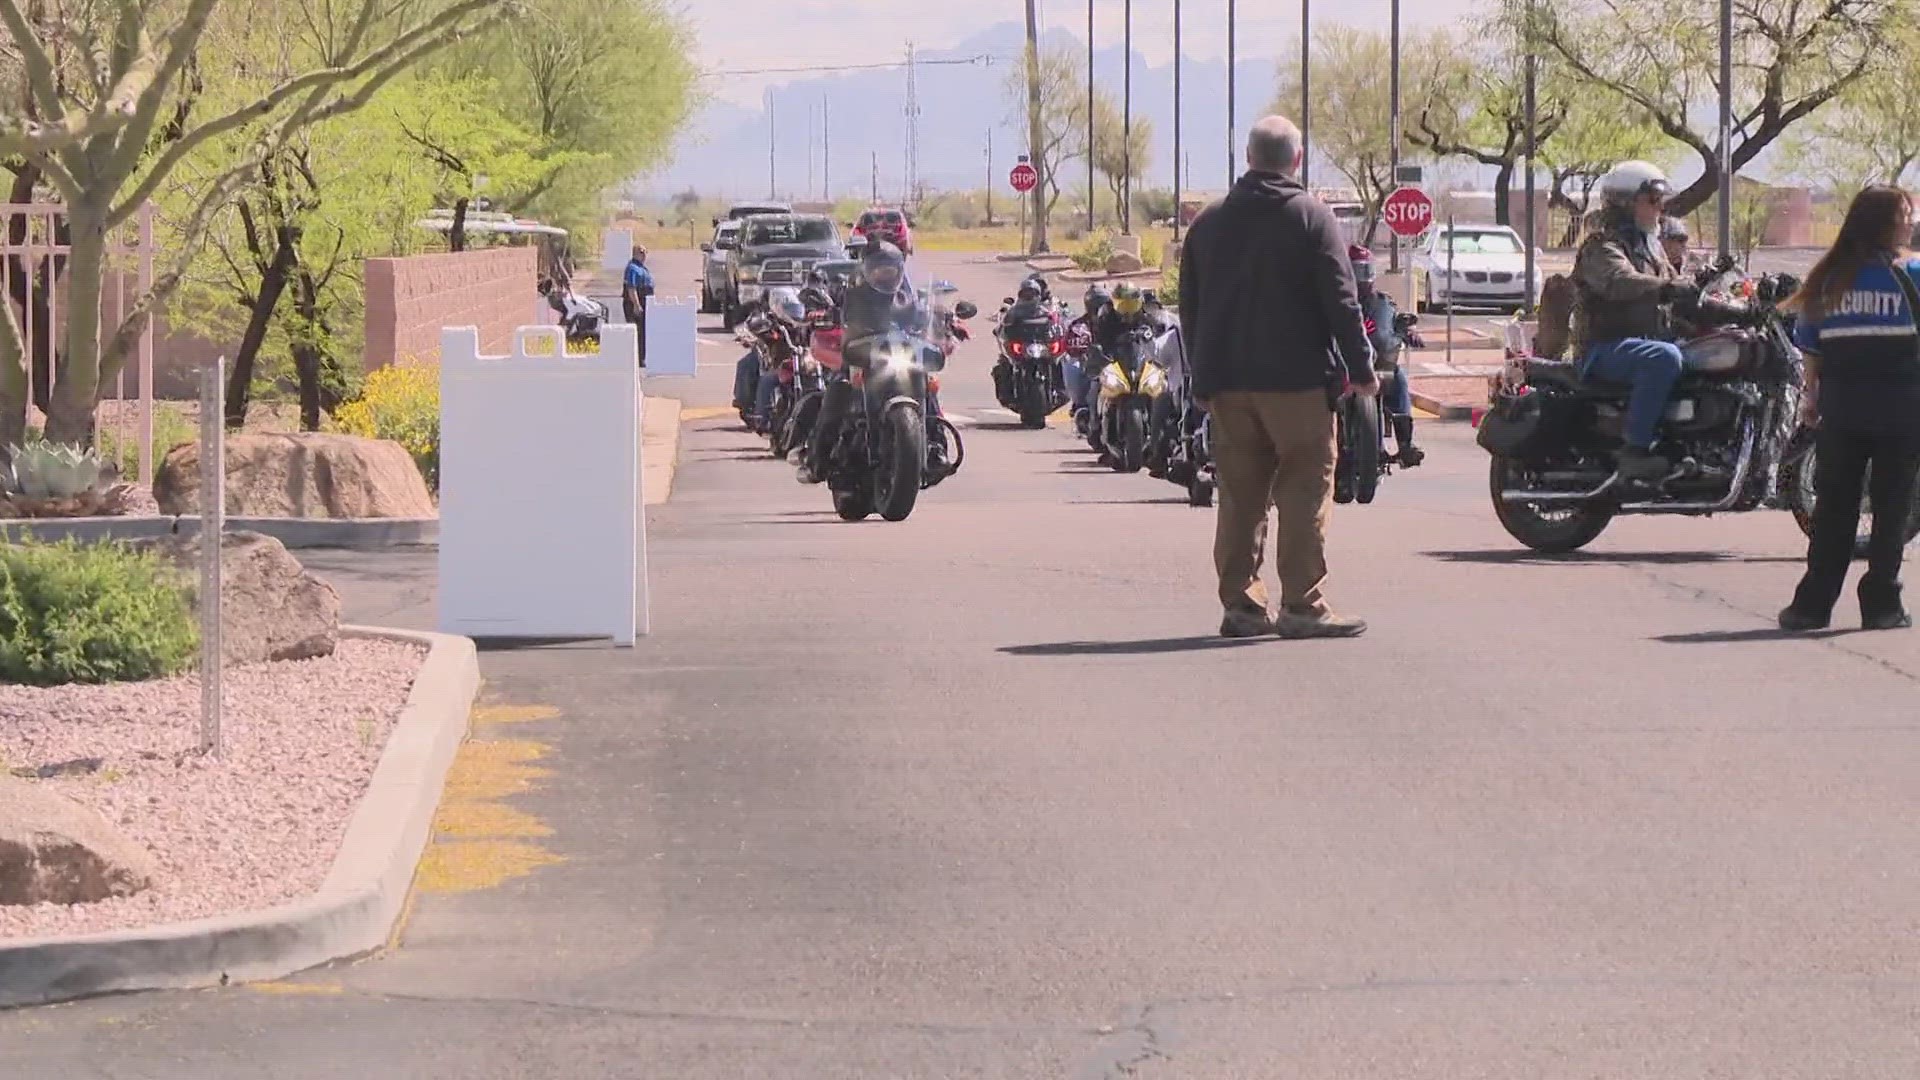 Hundreds of riders took to the roads in Phoenix on Saturday with the goal of raising money and awareness for missing and murdered Indigenous people.